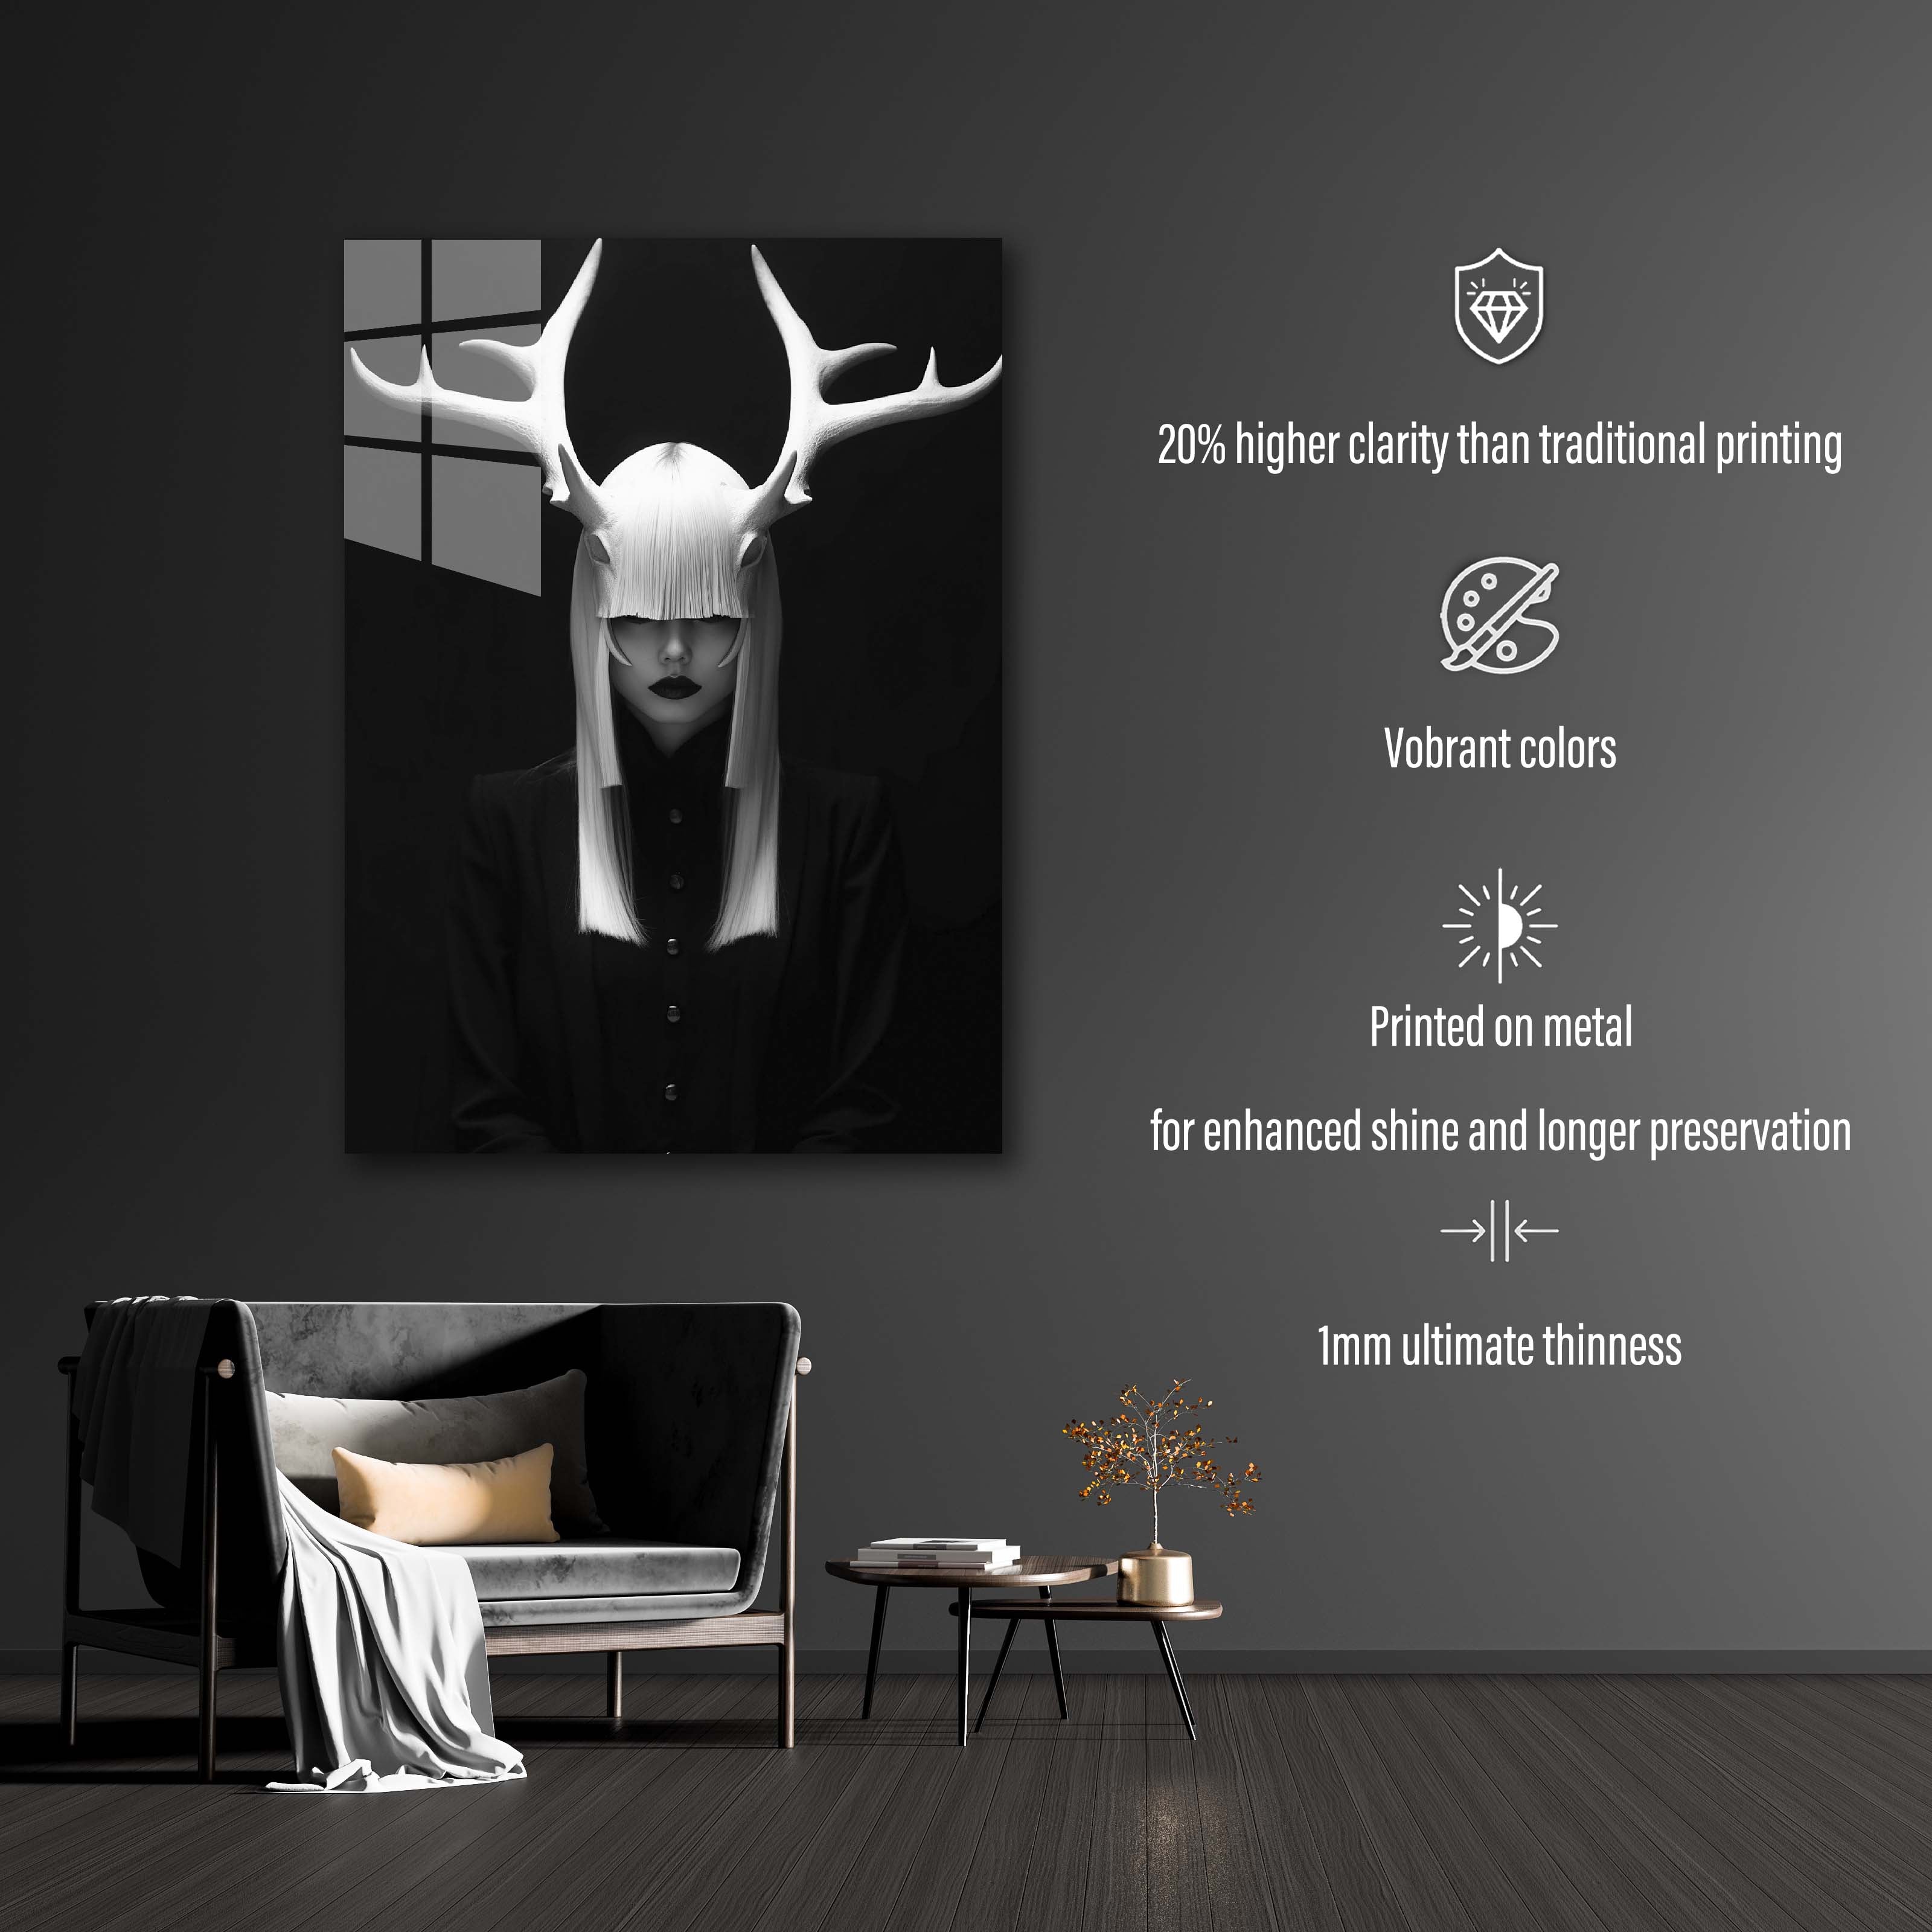 Woman With Antlers 5. Black bakcground.-designed by @VanessaGF